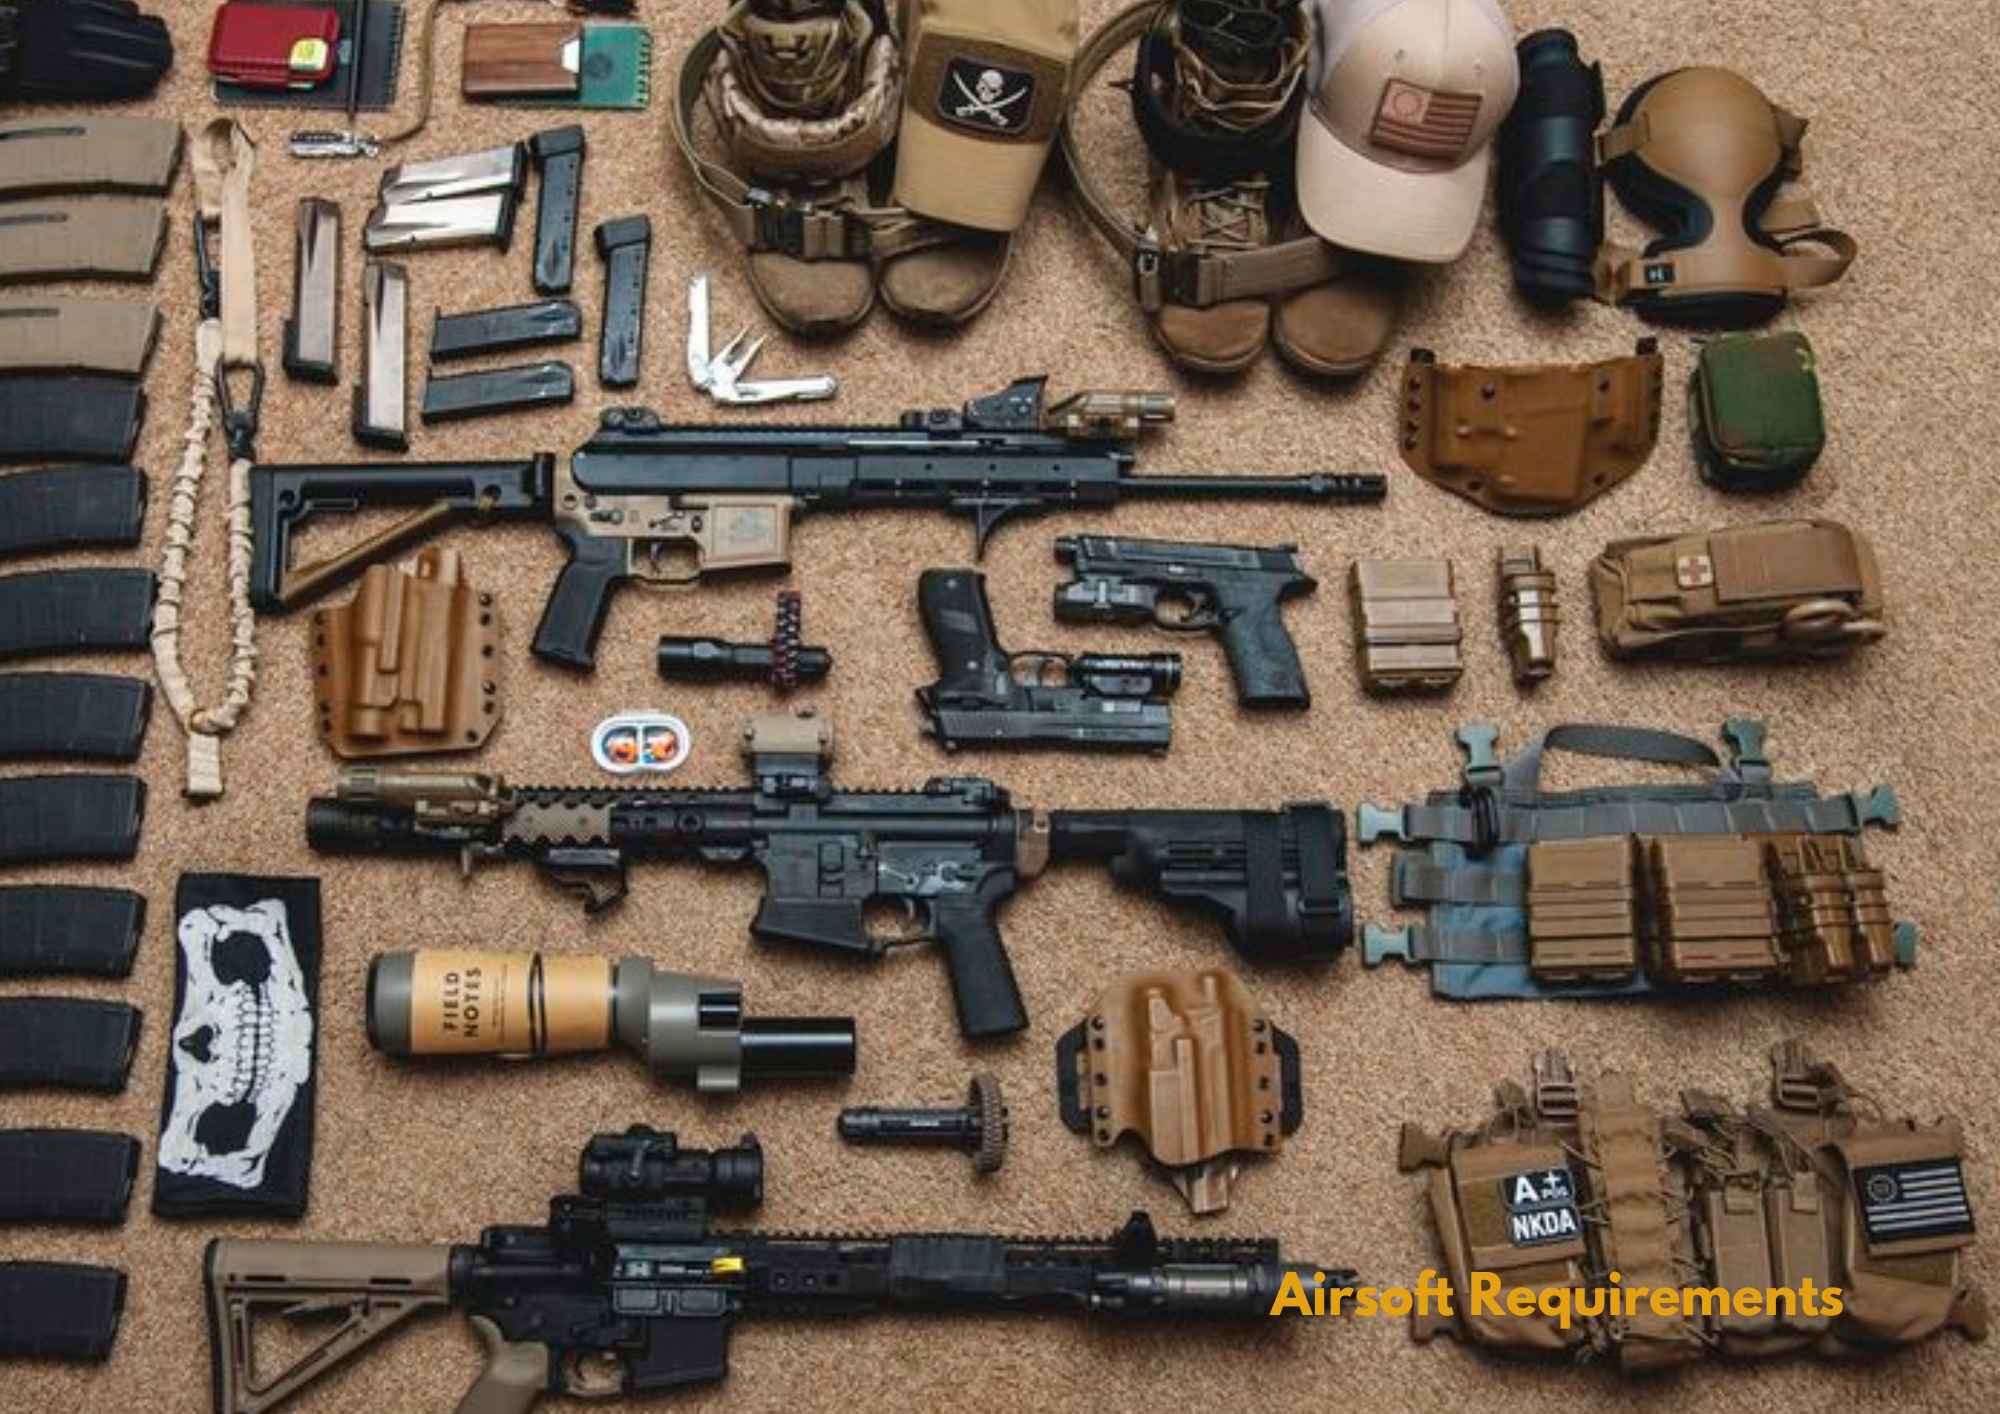 Airsoft Requirements